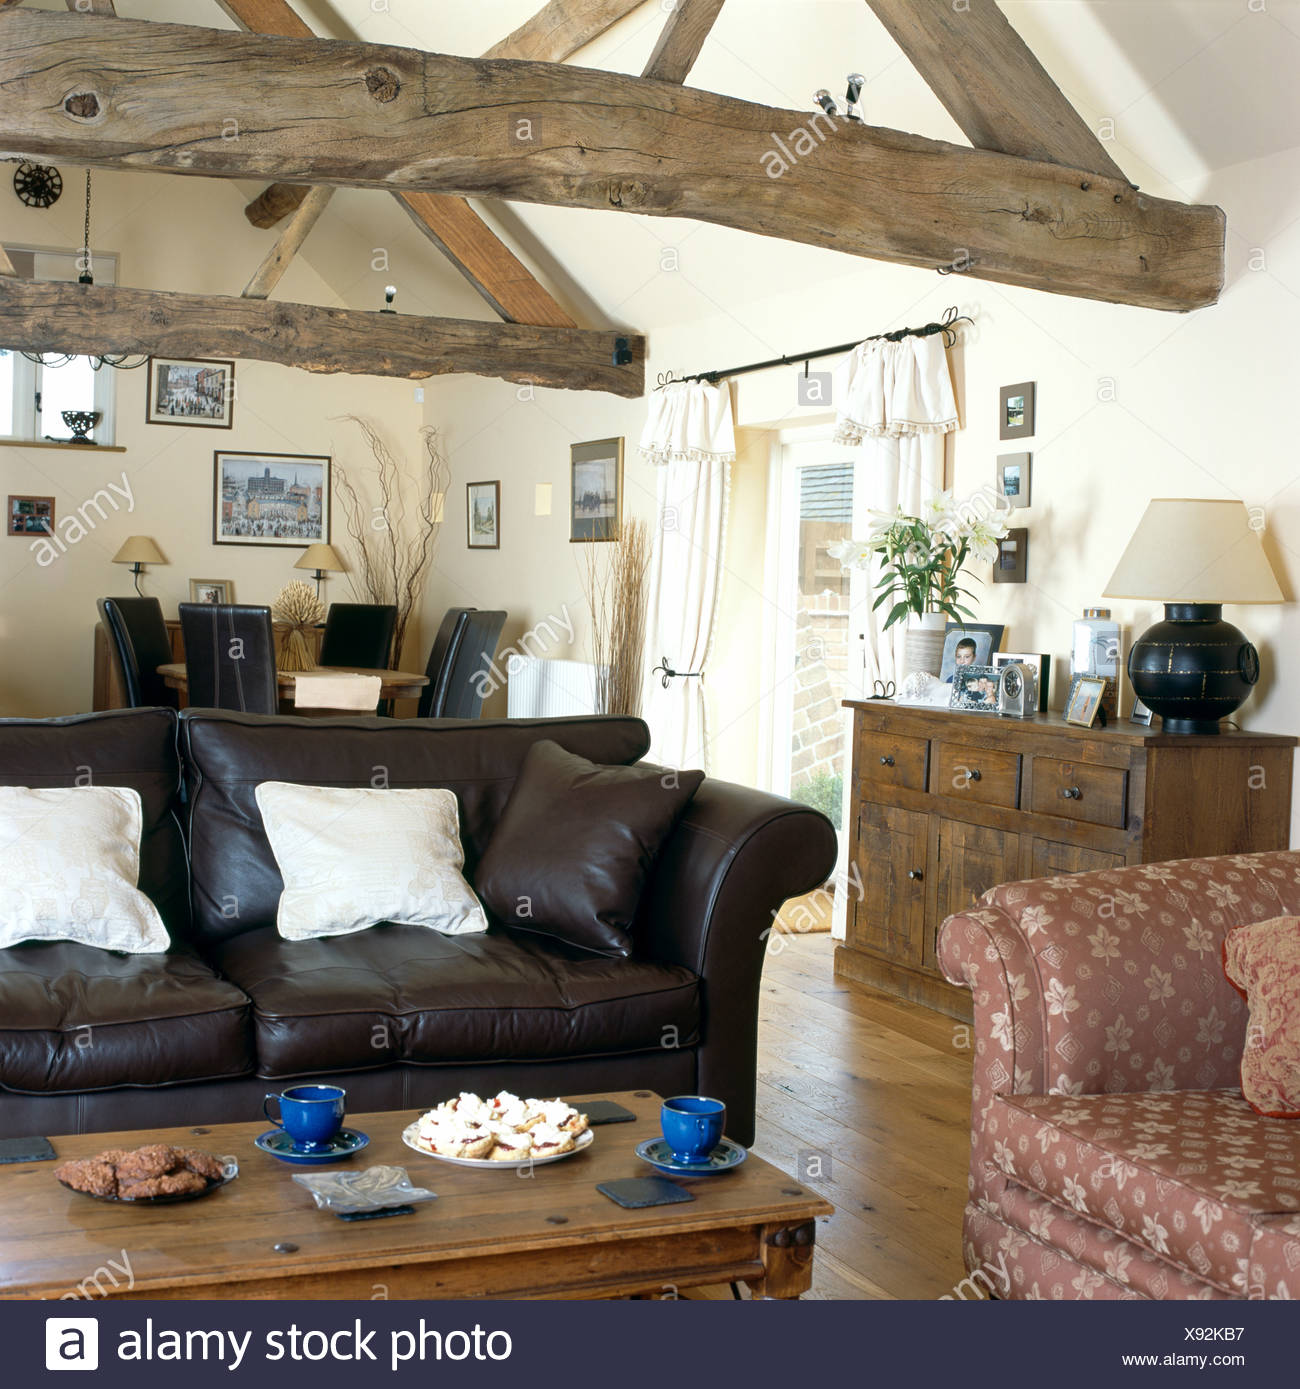 Black Leather Sofa And Old Wooden Chest In Country Living Room